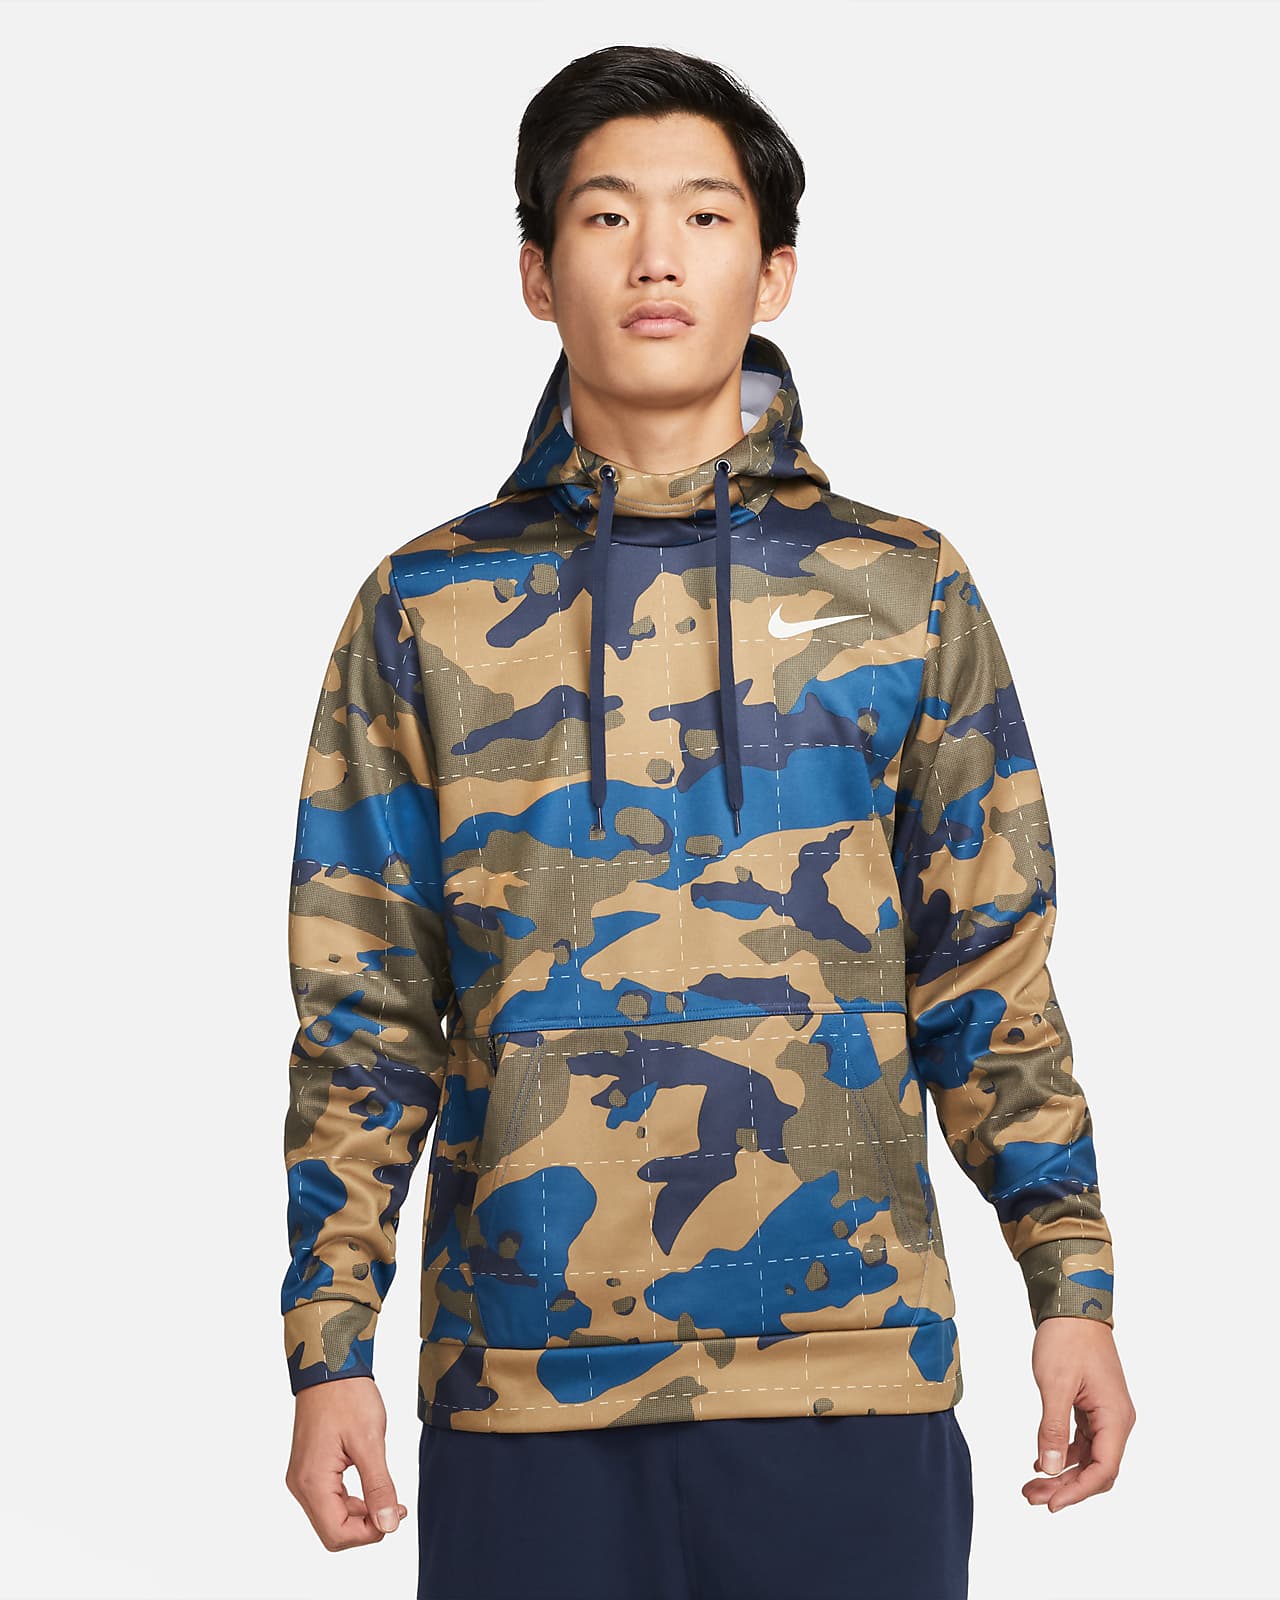 Nike Therma-FIT Men's Pullover Camo Training Hoodie